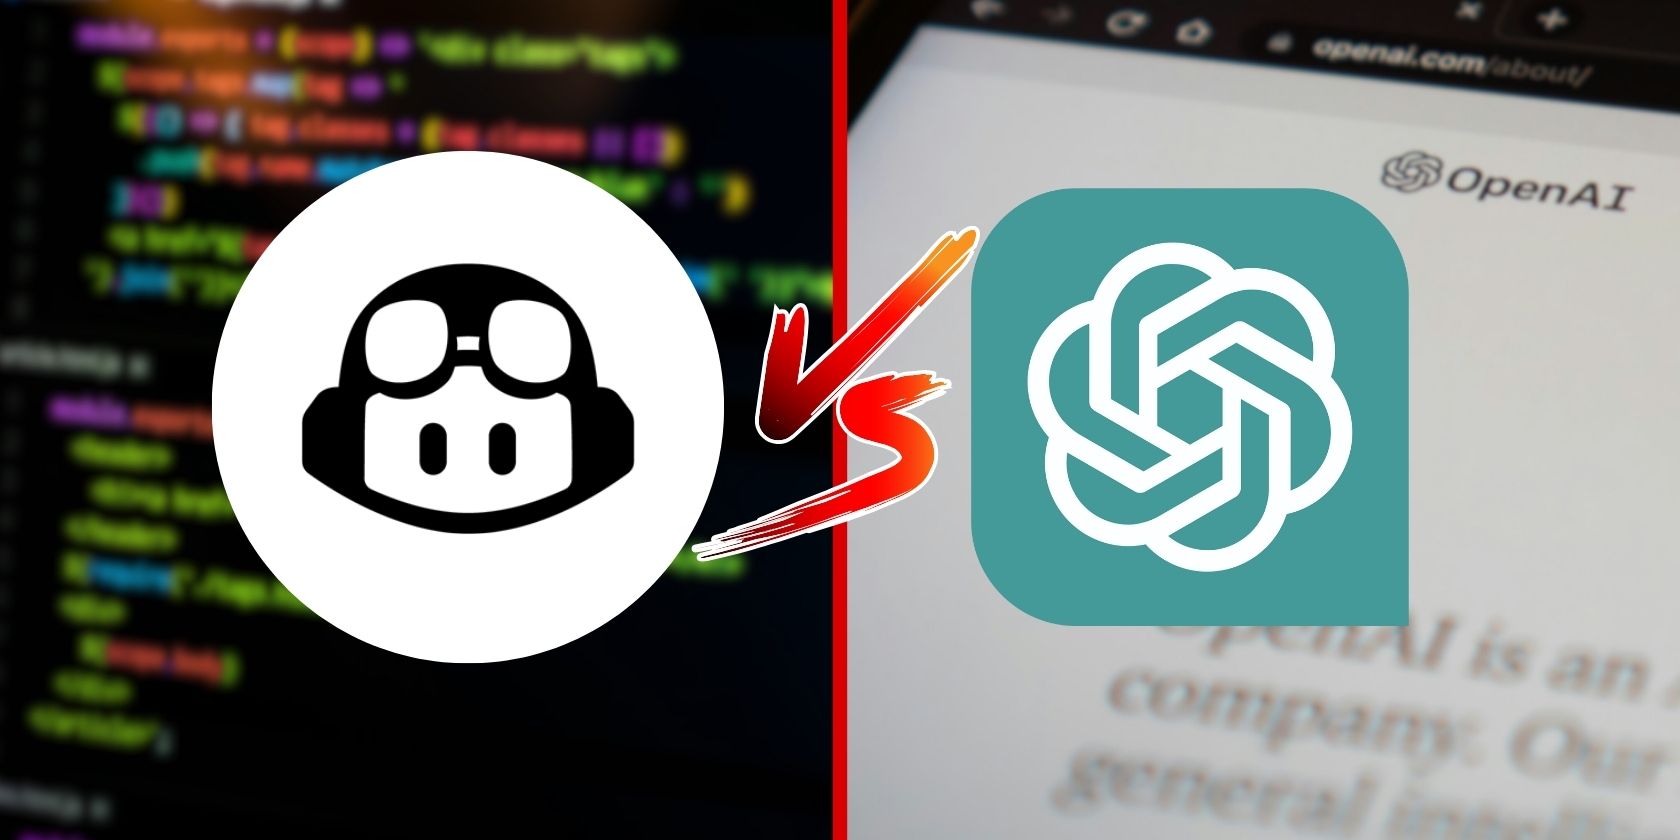 GitHub Copilot vs. ChatGPT: Which Is Better for Programming?